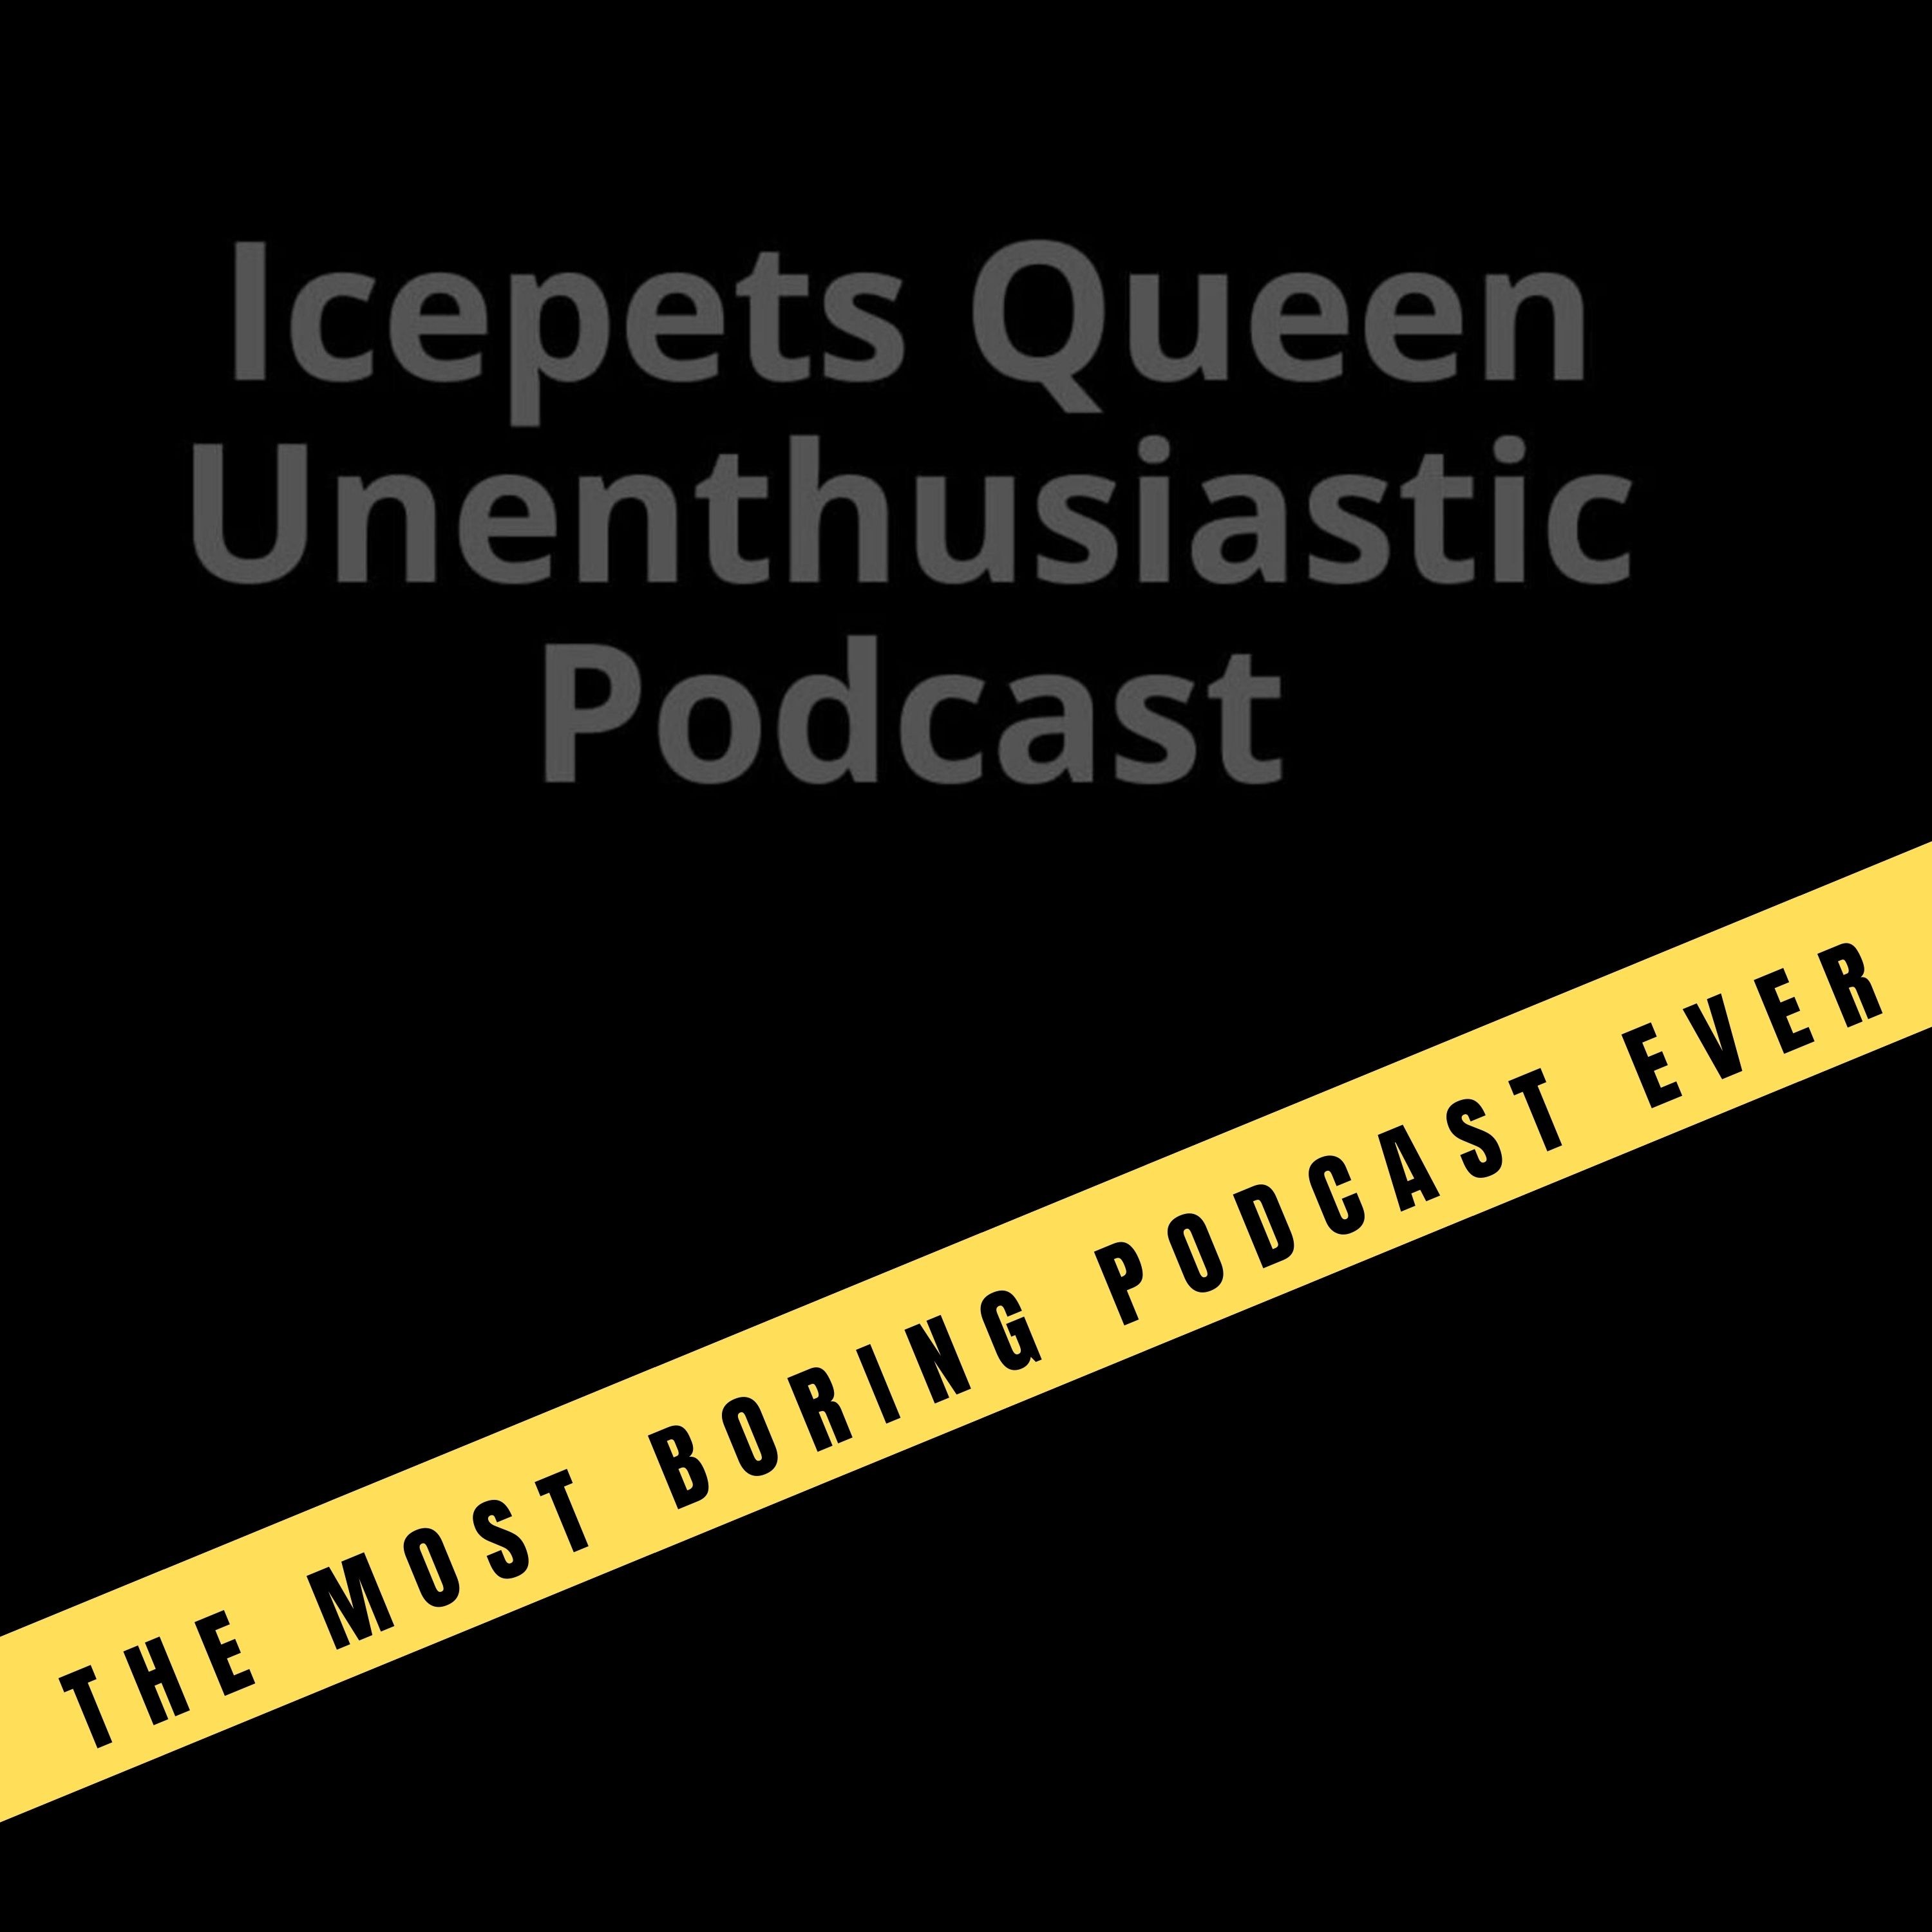 Icepets Queen Unenthusiastic Podcast